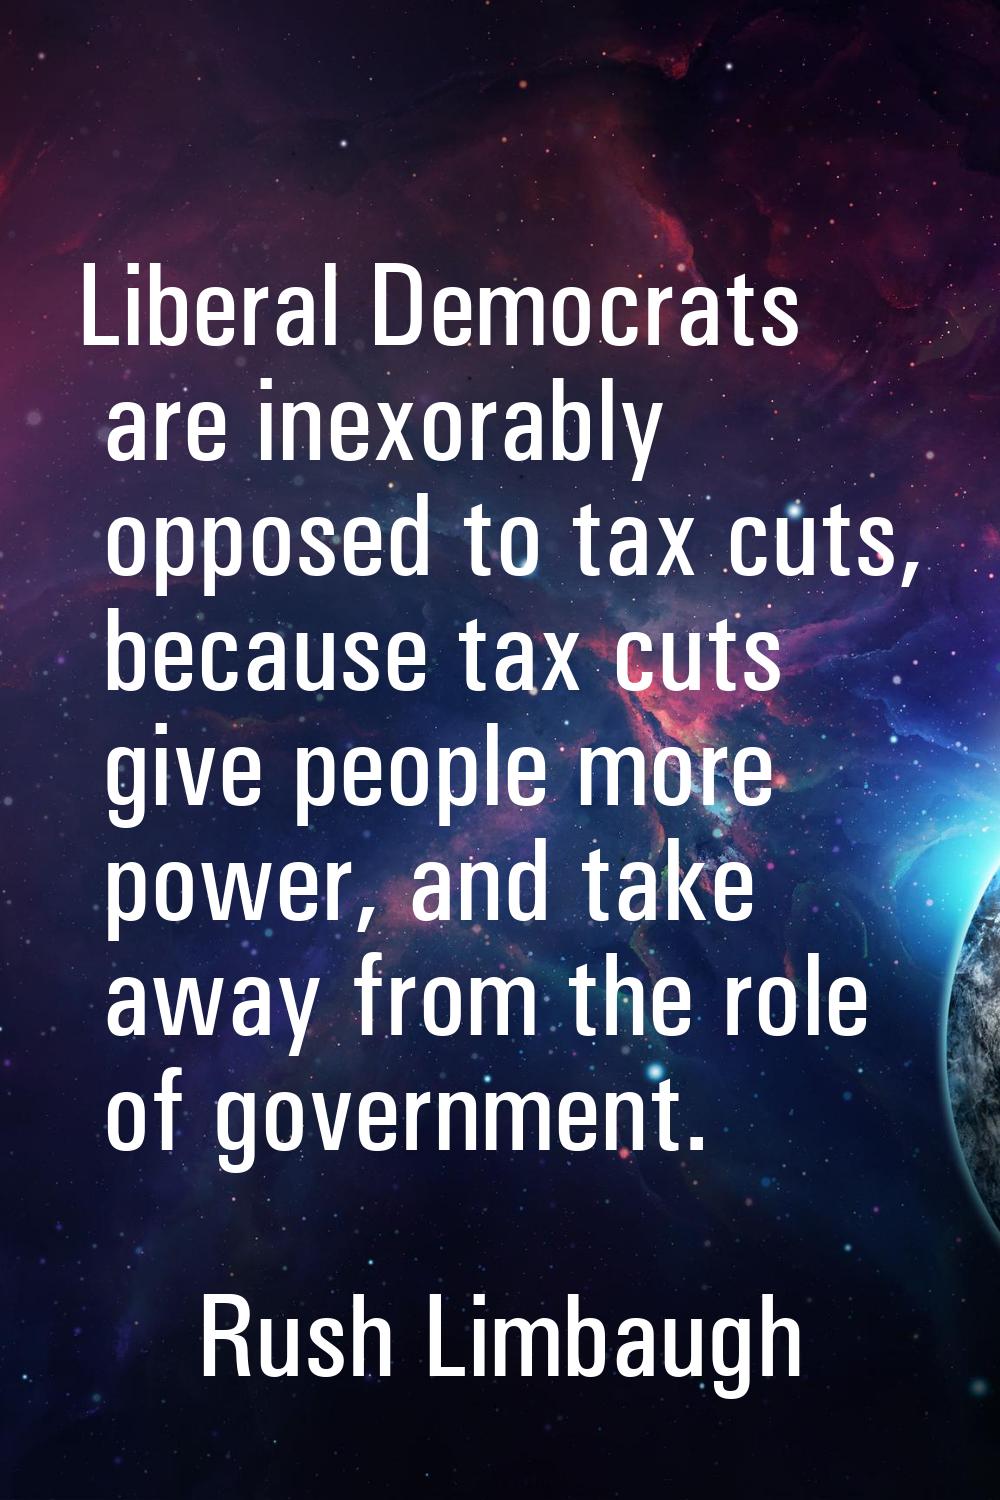 Liberal Democrats are inexorably opposed to tax cuts, because tax cuts give people more power, and 